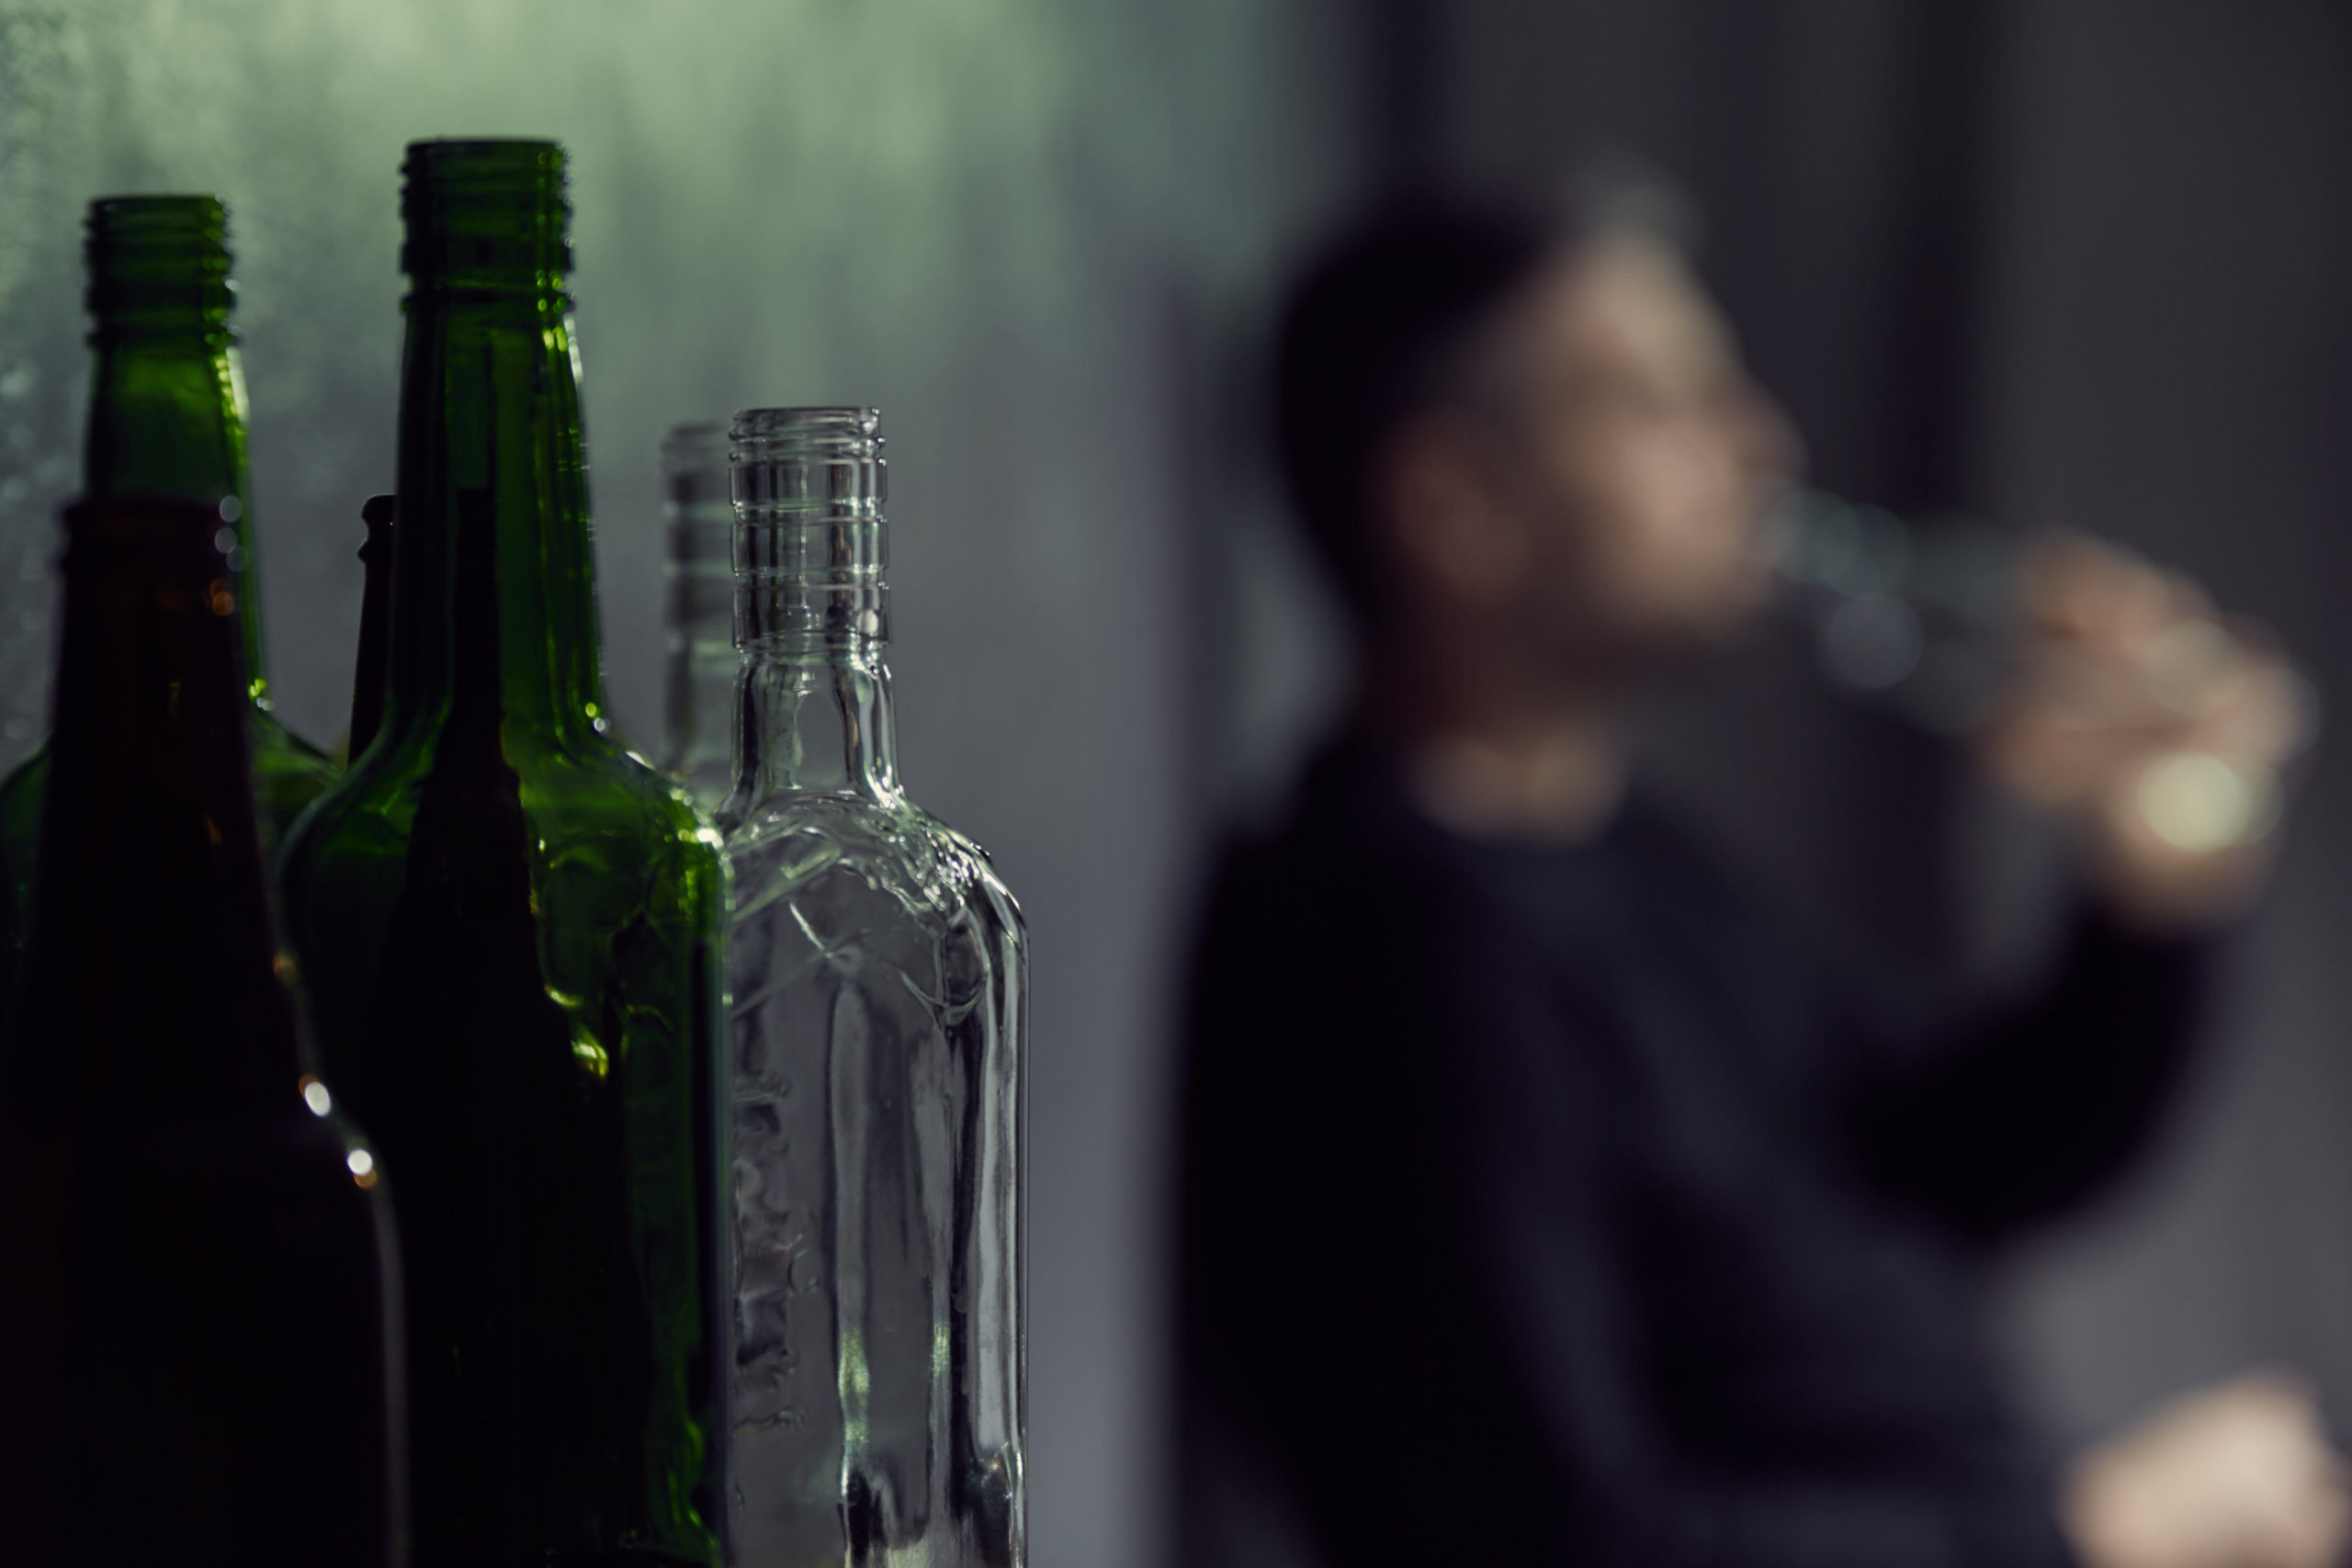 What are the Symptoms of Alcohol Abuse?